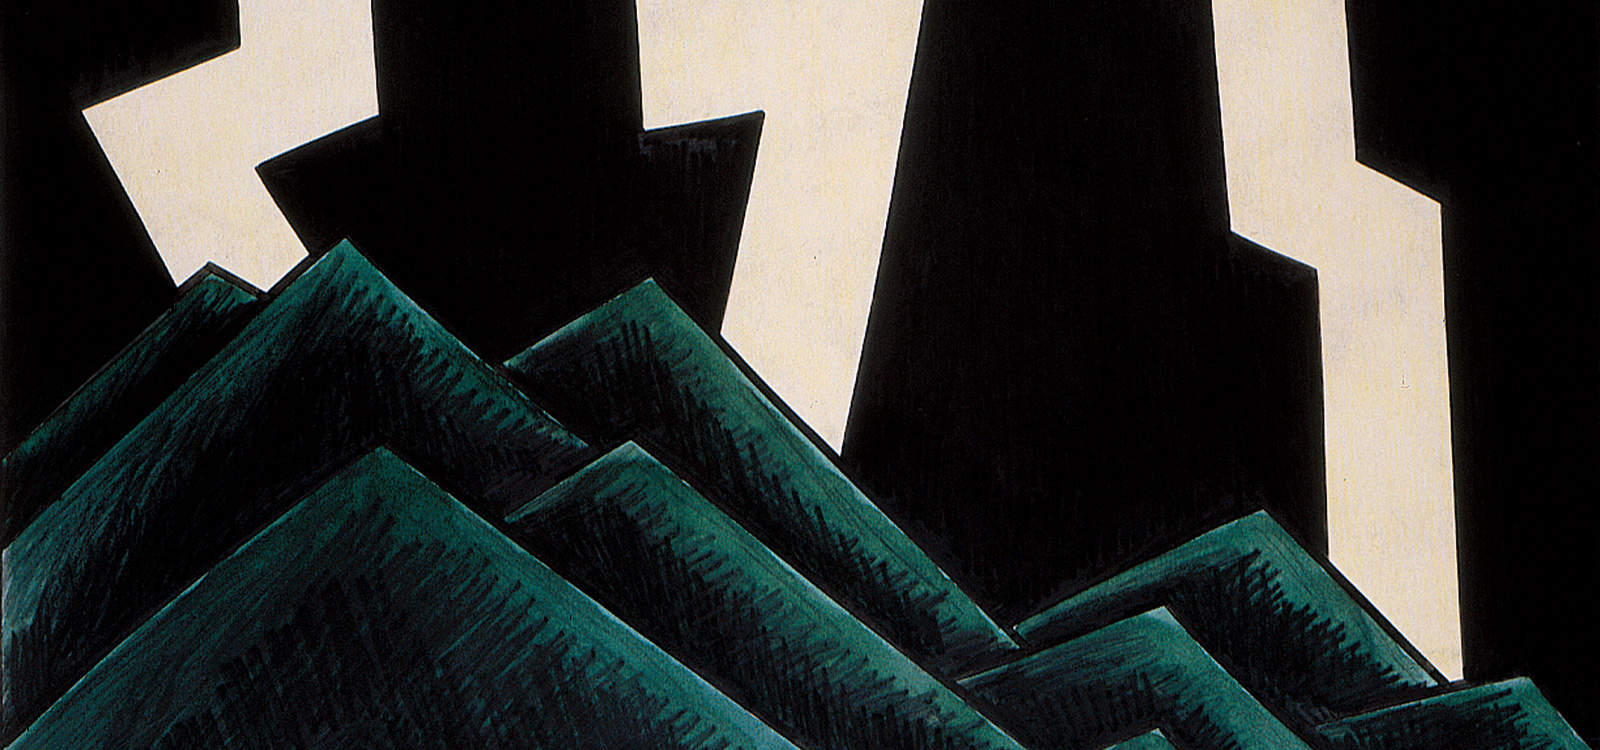 Drawing of geometric shapes. Across the bottom are pointed triangles in green and overlapping each other. The background is jagged vertical stripes of black and white.